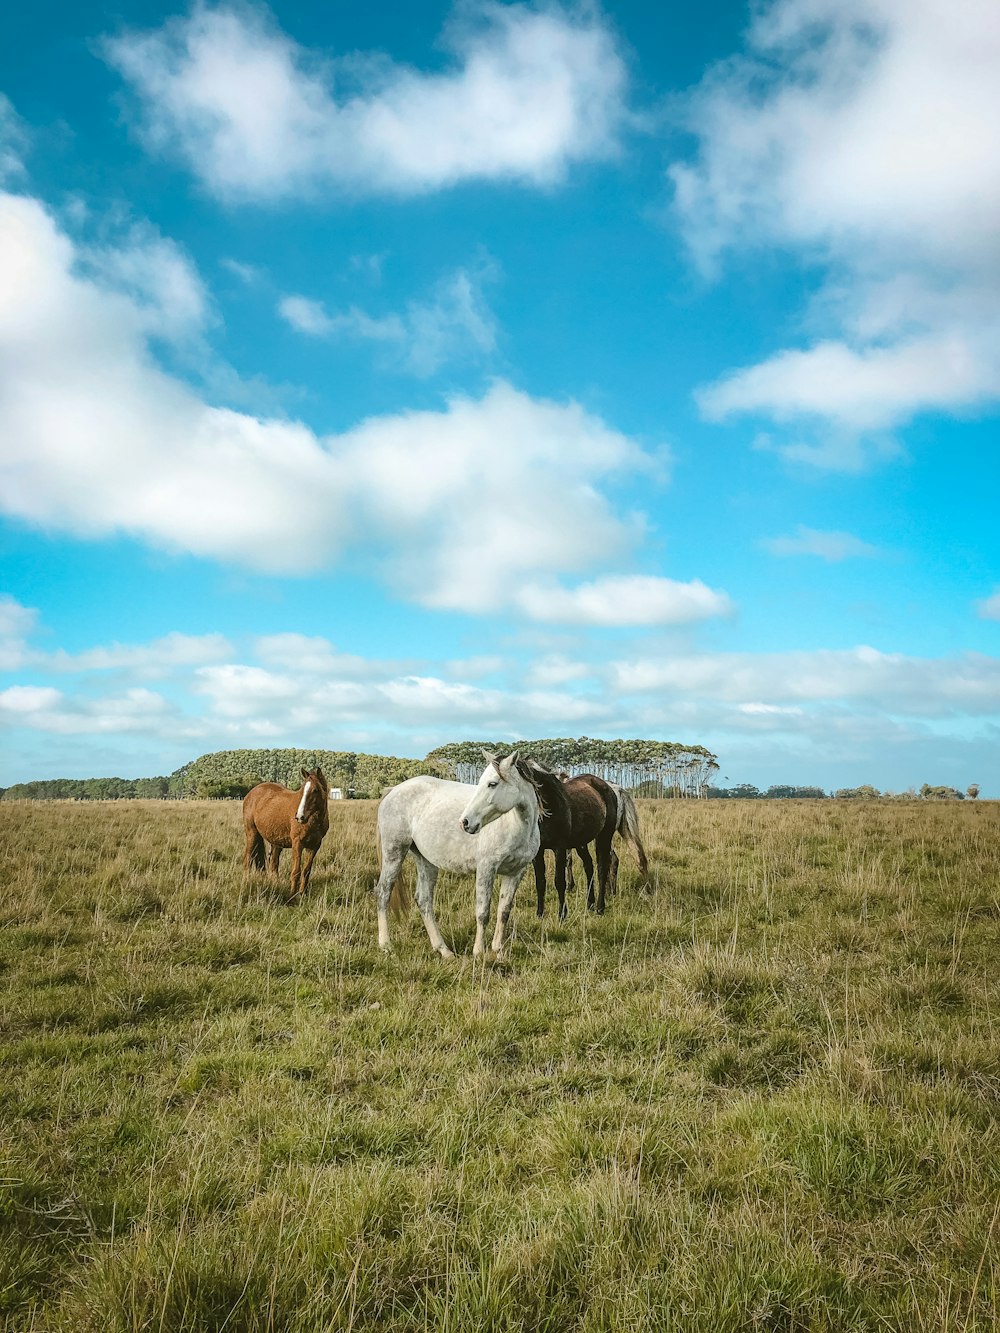 white and brown horses on green grass field under blue sky during daytime